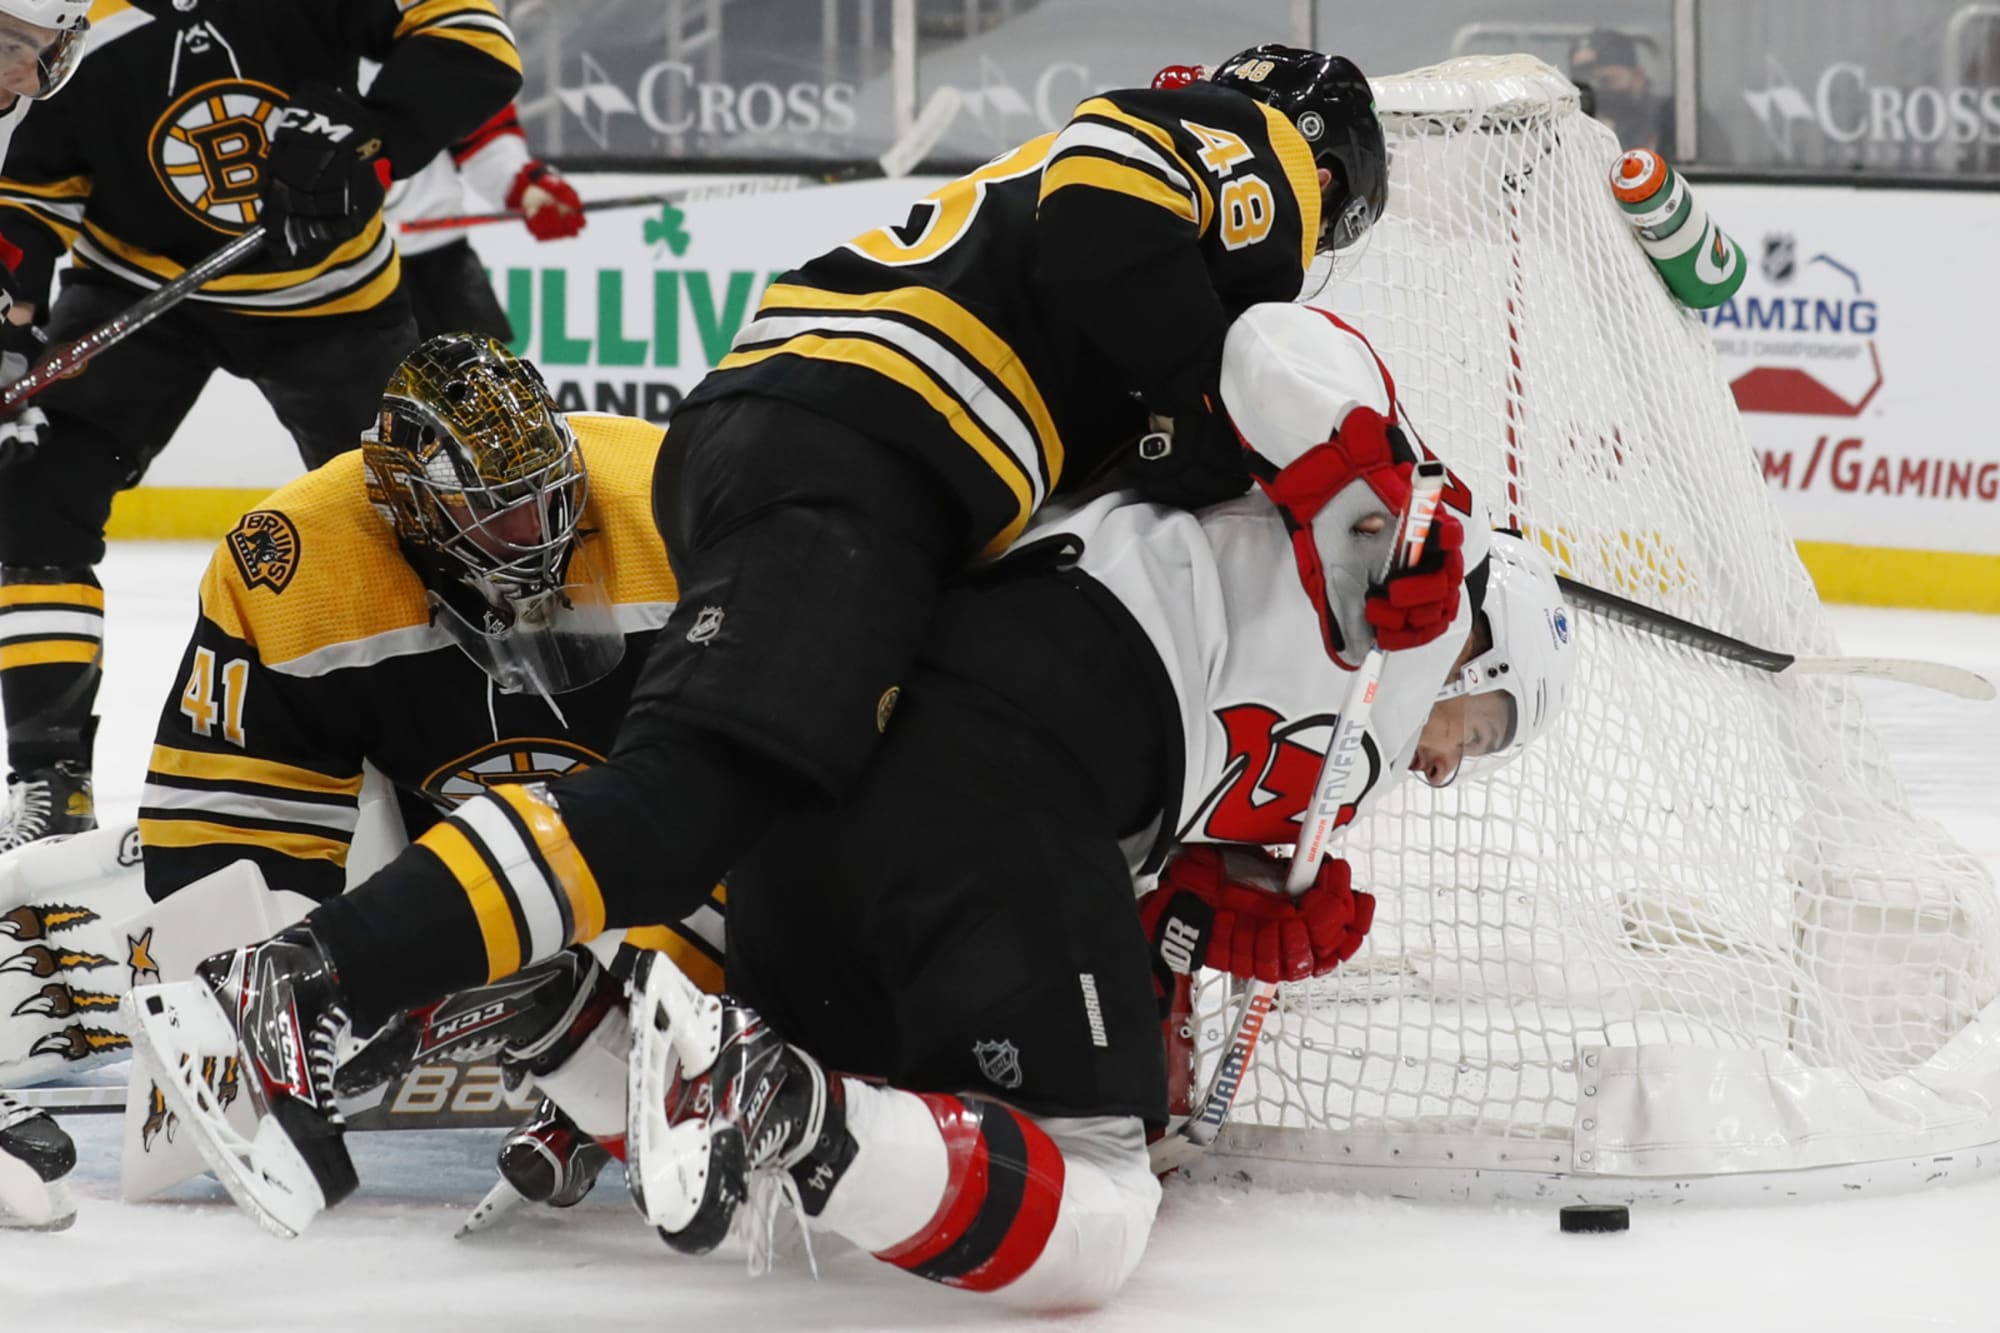 Bruins vs Devils 3/28/21: Hoping to score against NJ, lineups, and more